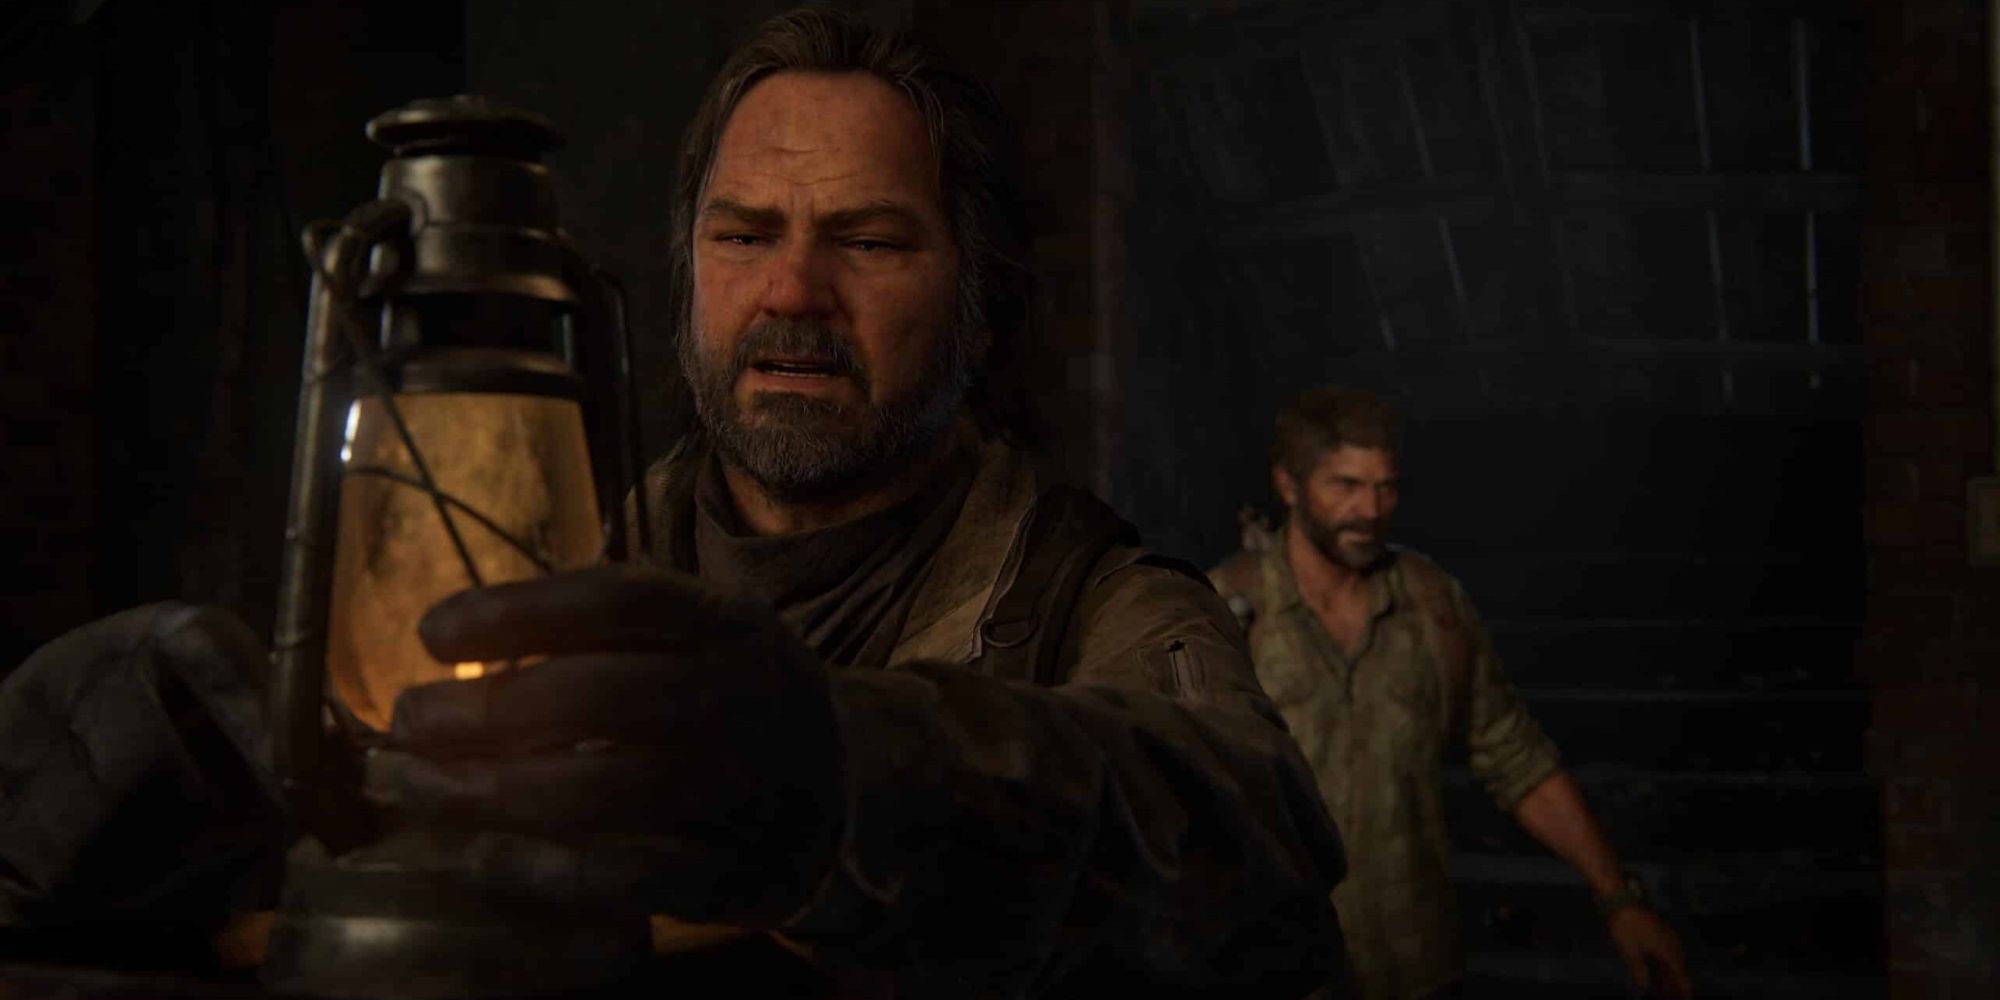 Bill attempting to light a lantern with a match as Joel stands behind him and speaks sternly in conversation.